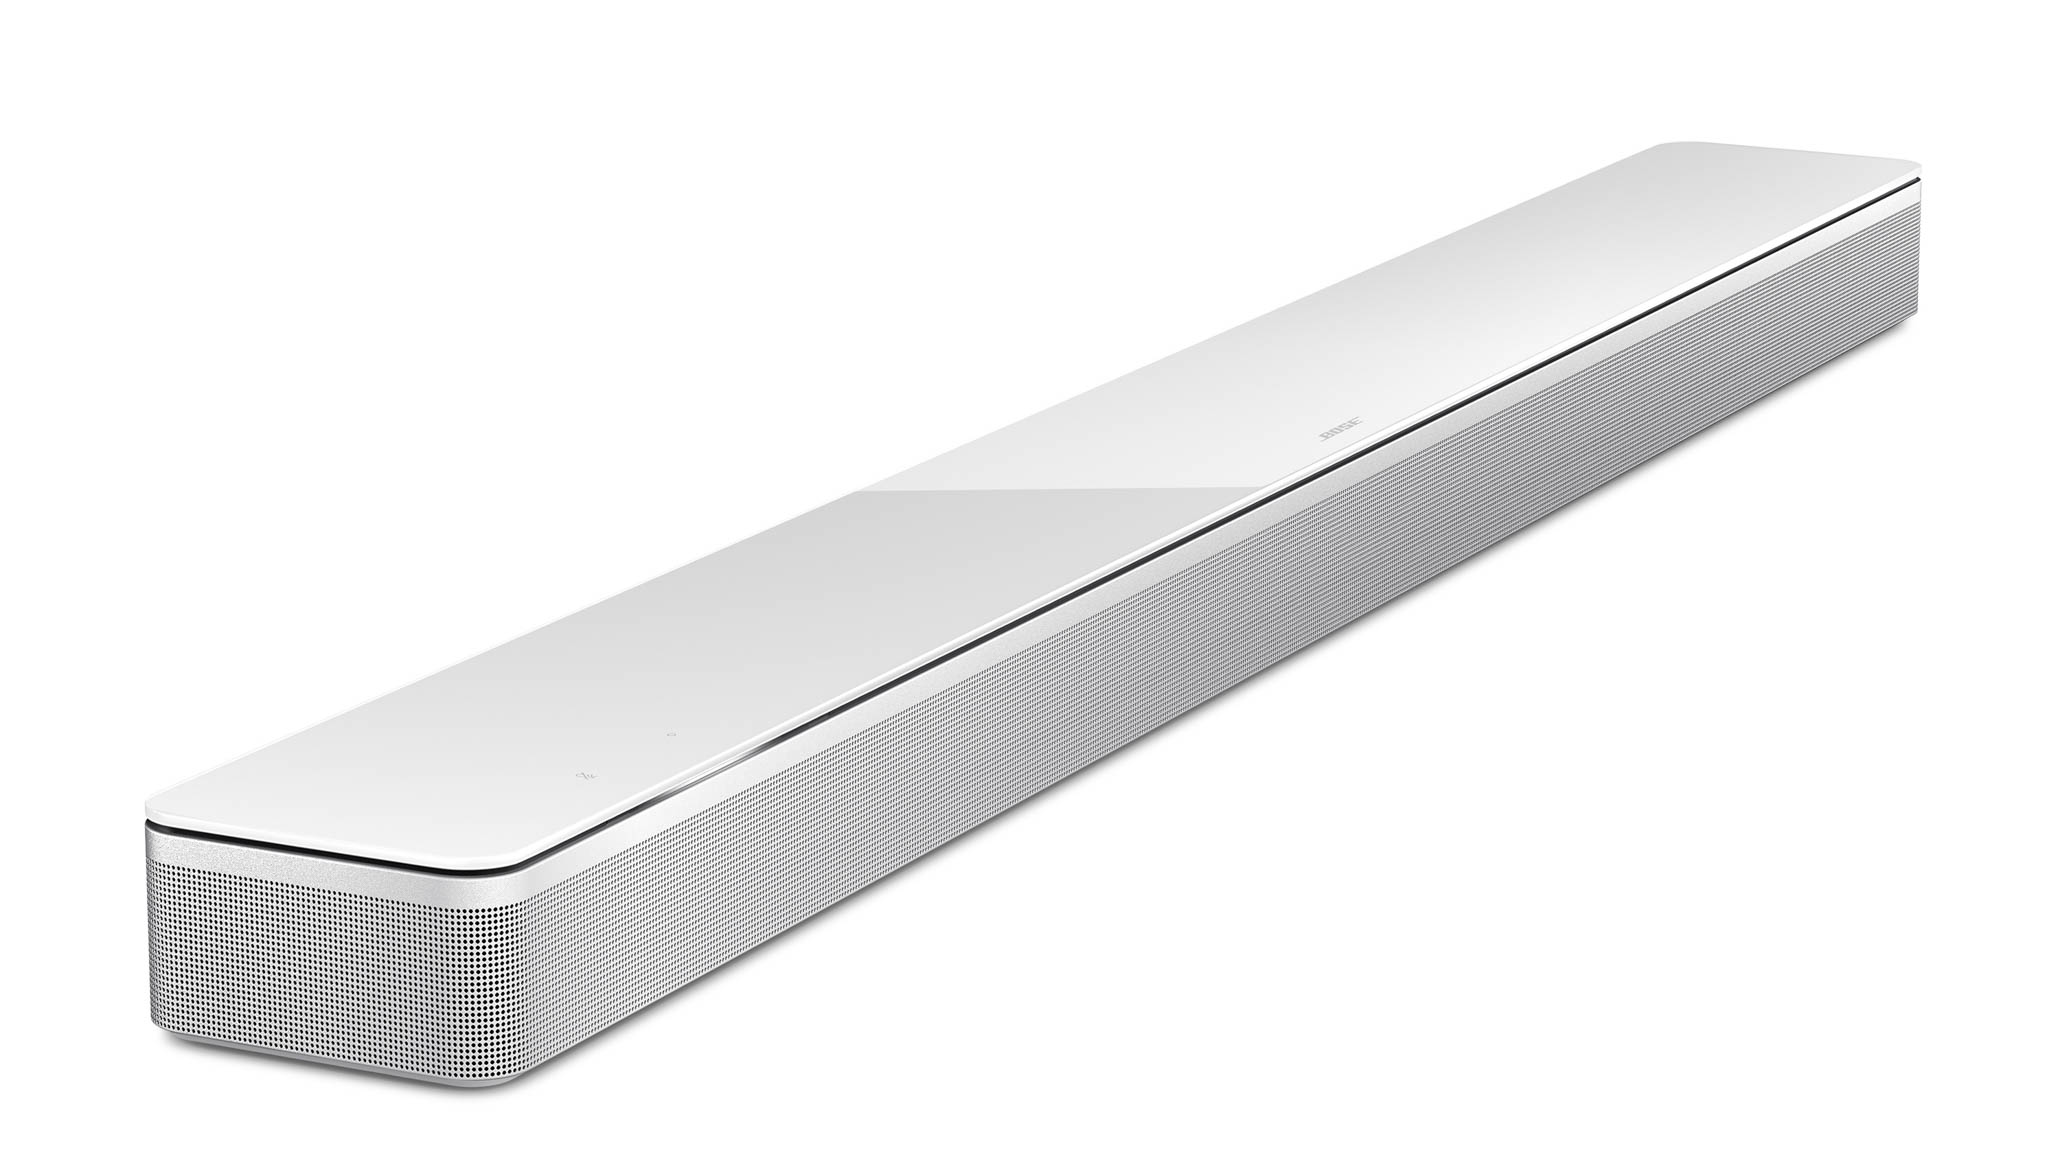 One of two new Bose soundbars in the new smart speaker line, the Soundbar 700 features an 8-microphone array for picking up voice commands. Image: Bose.